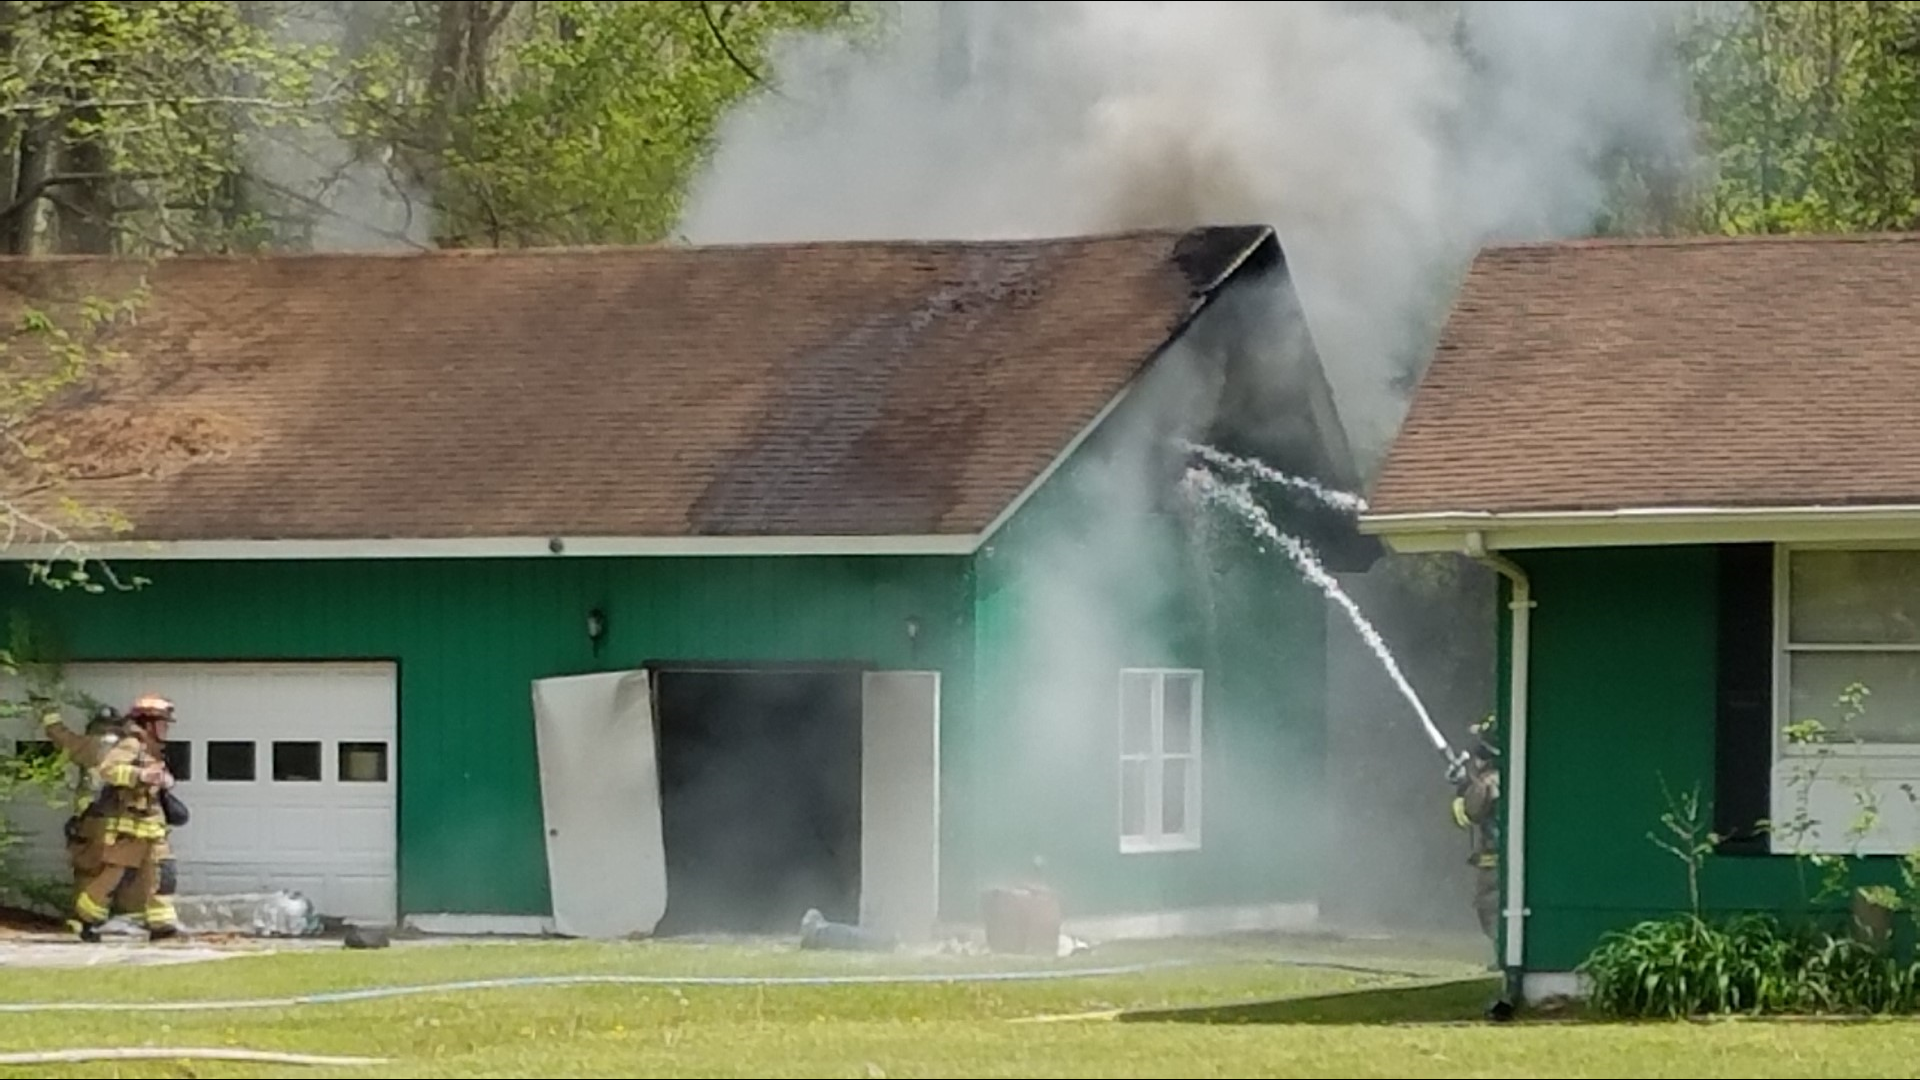 The Moyock Fire Department responds to a shed fire on Foutz Drive. Video courtesy David Wilhelm